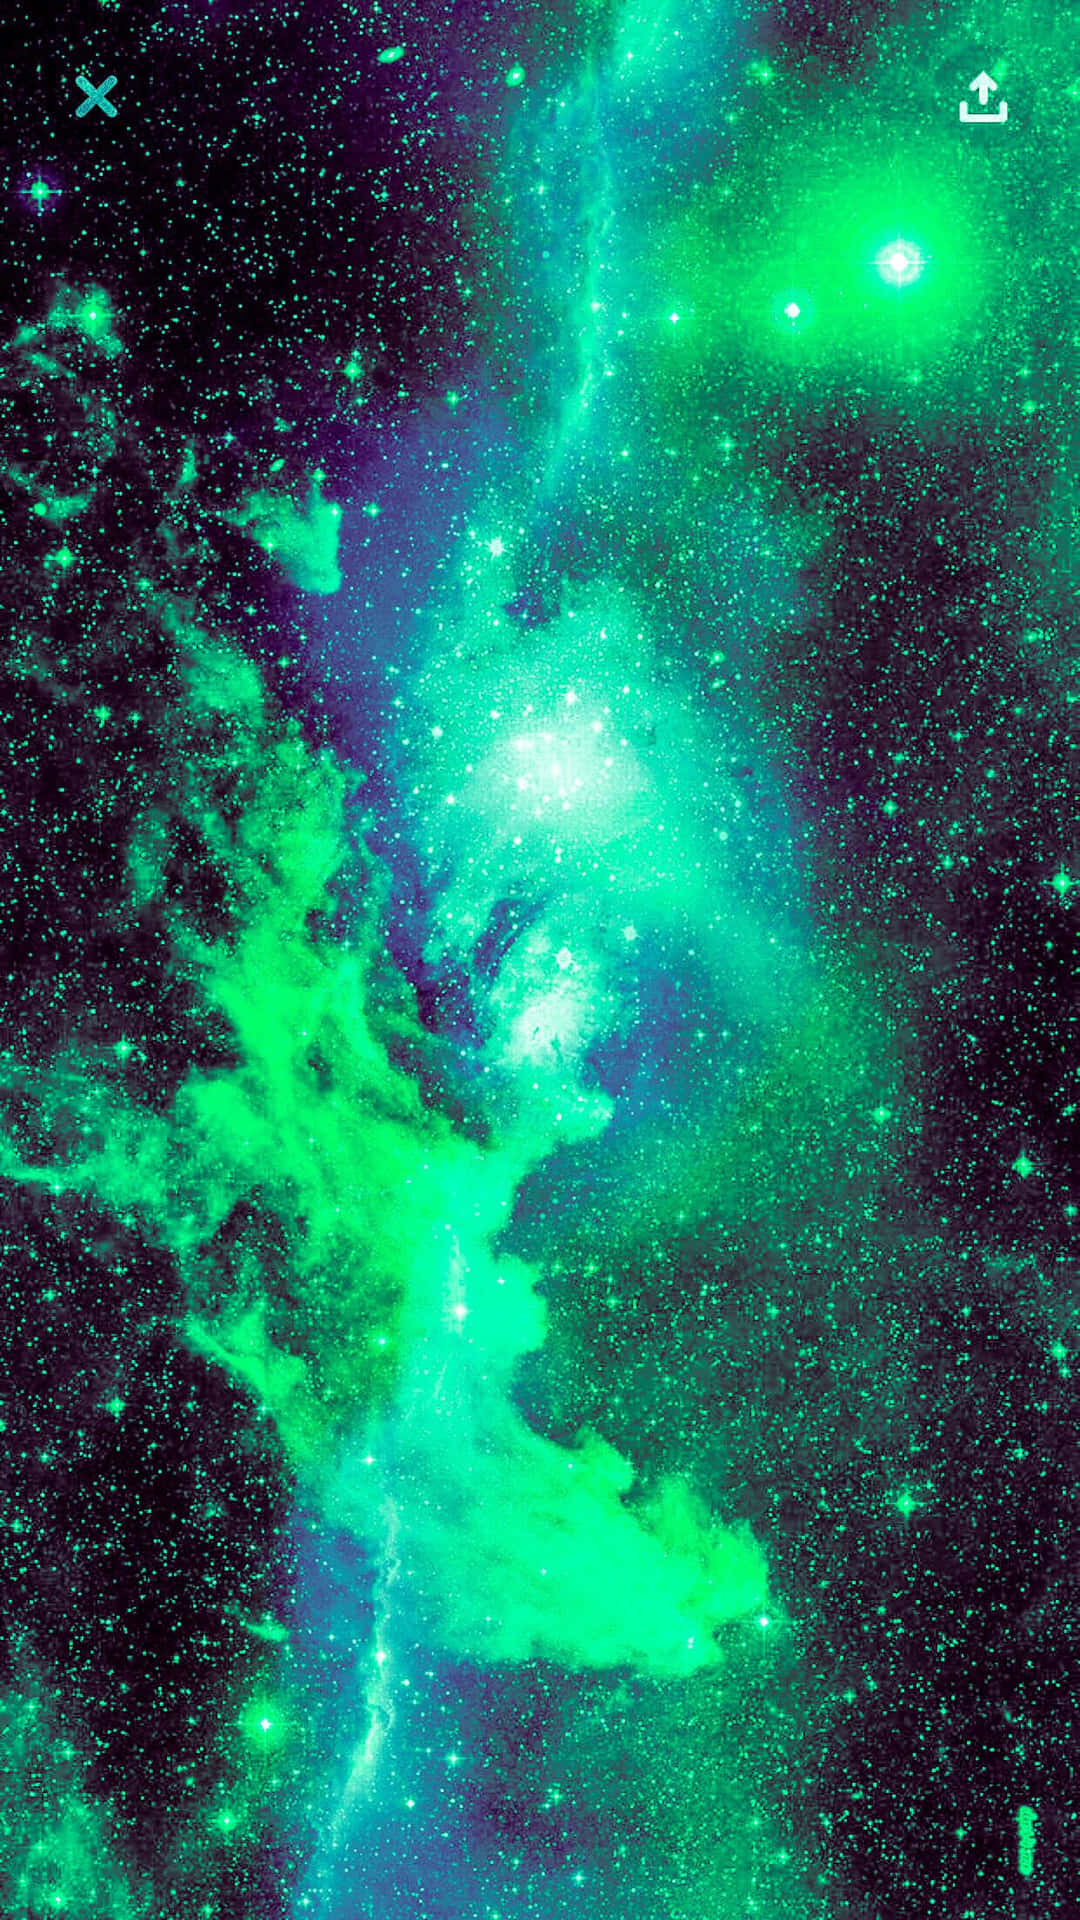 Exploring a stunning and vibrant Green and Blue Galaxy Wallpaper